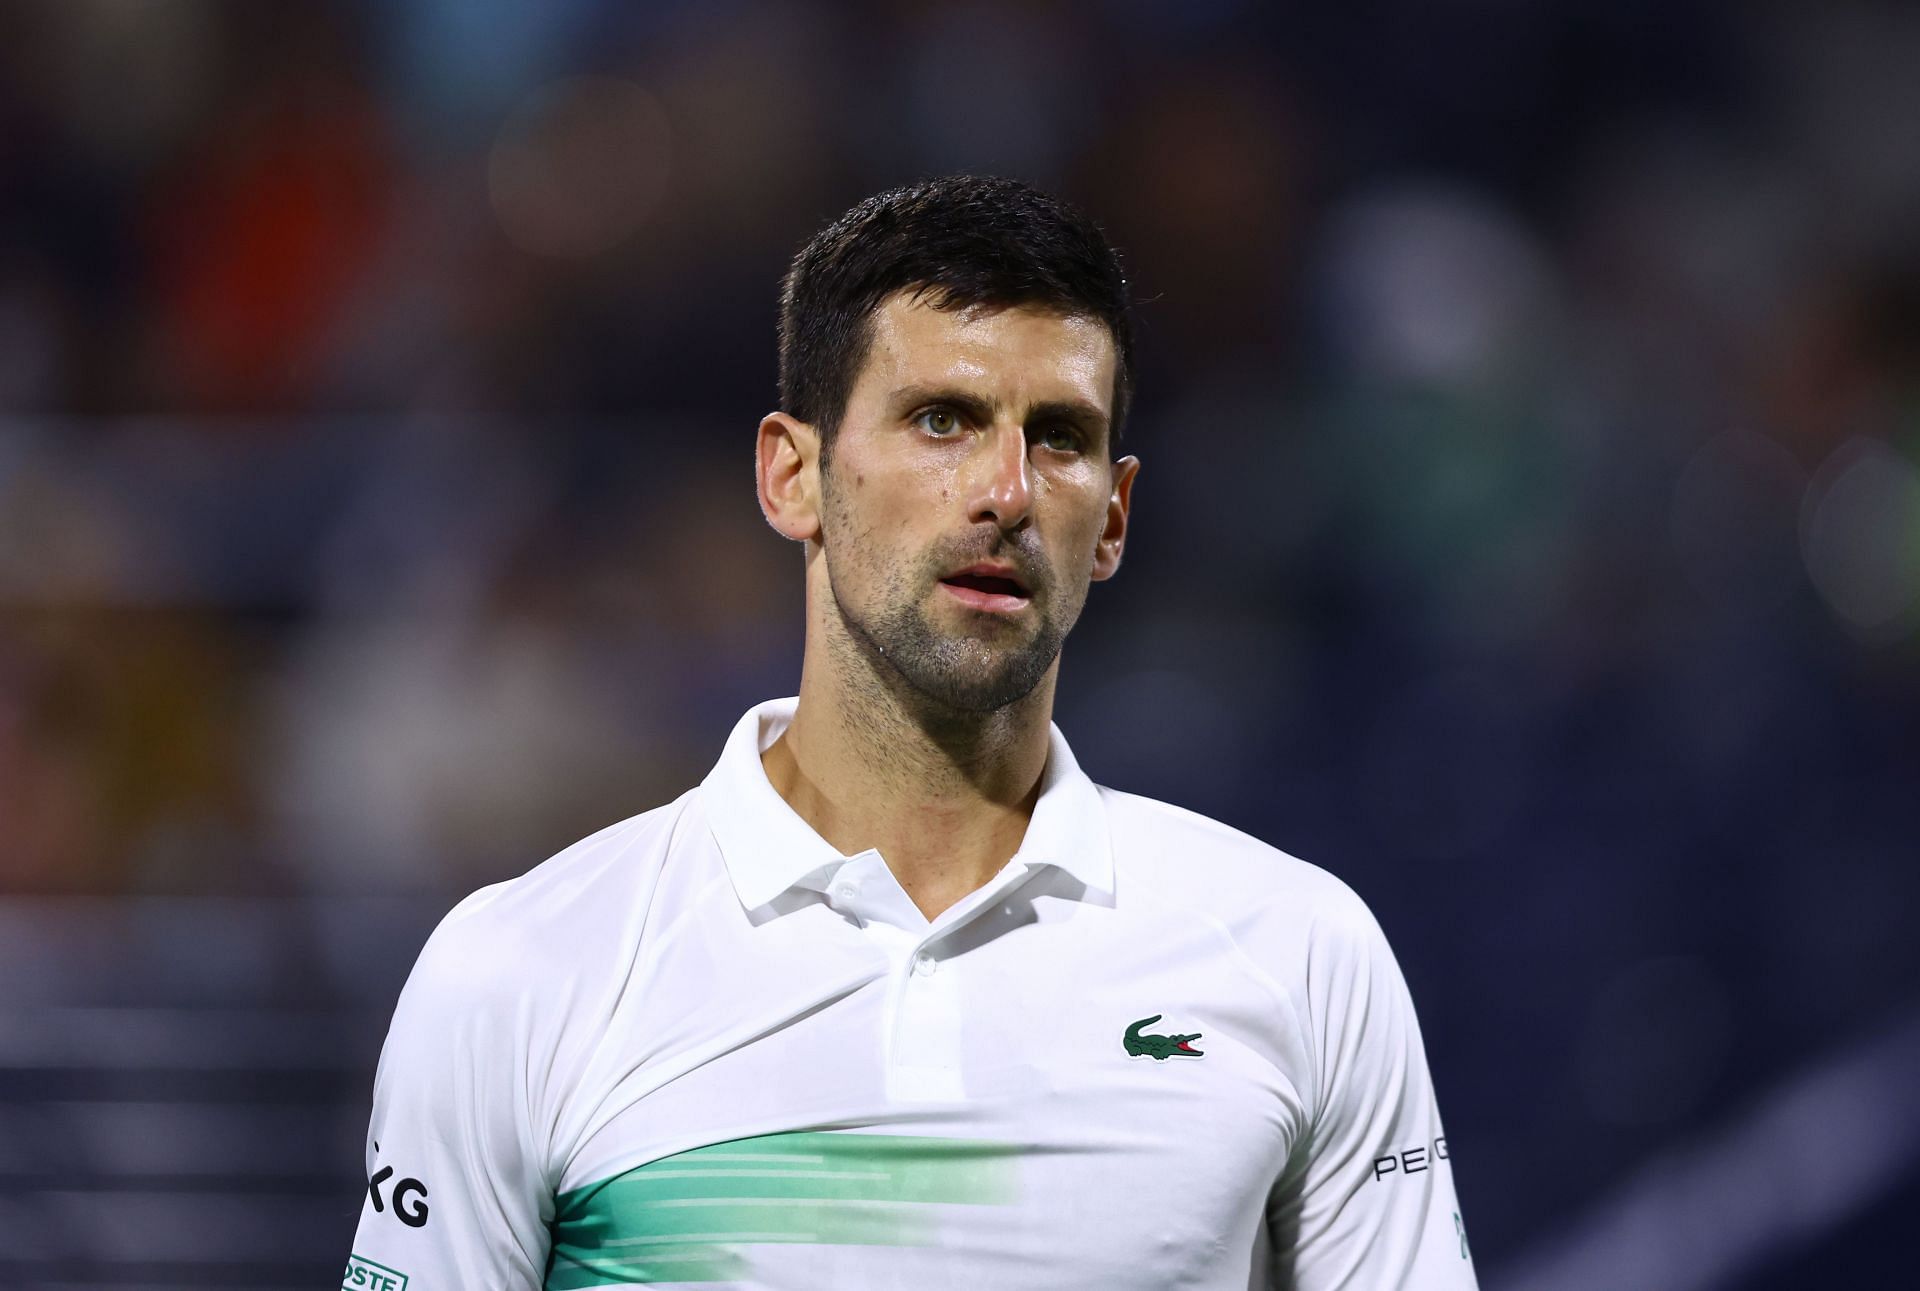 Novak Djokovic begins his campaign at the Serbia Open against Hamad Medjedovic or Laslo Djere